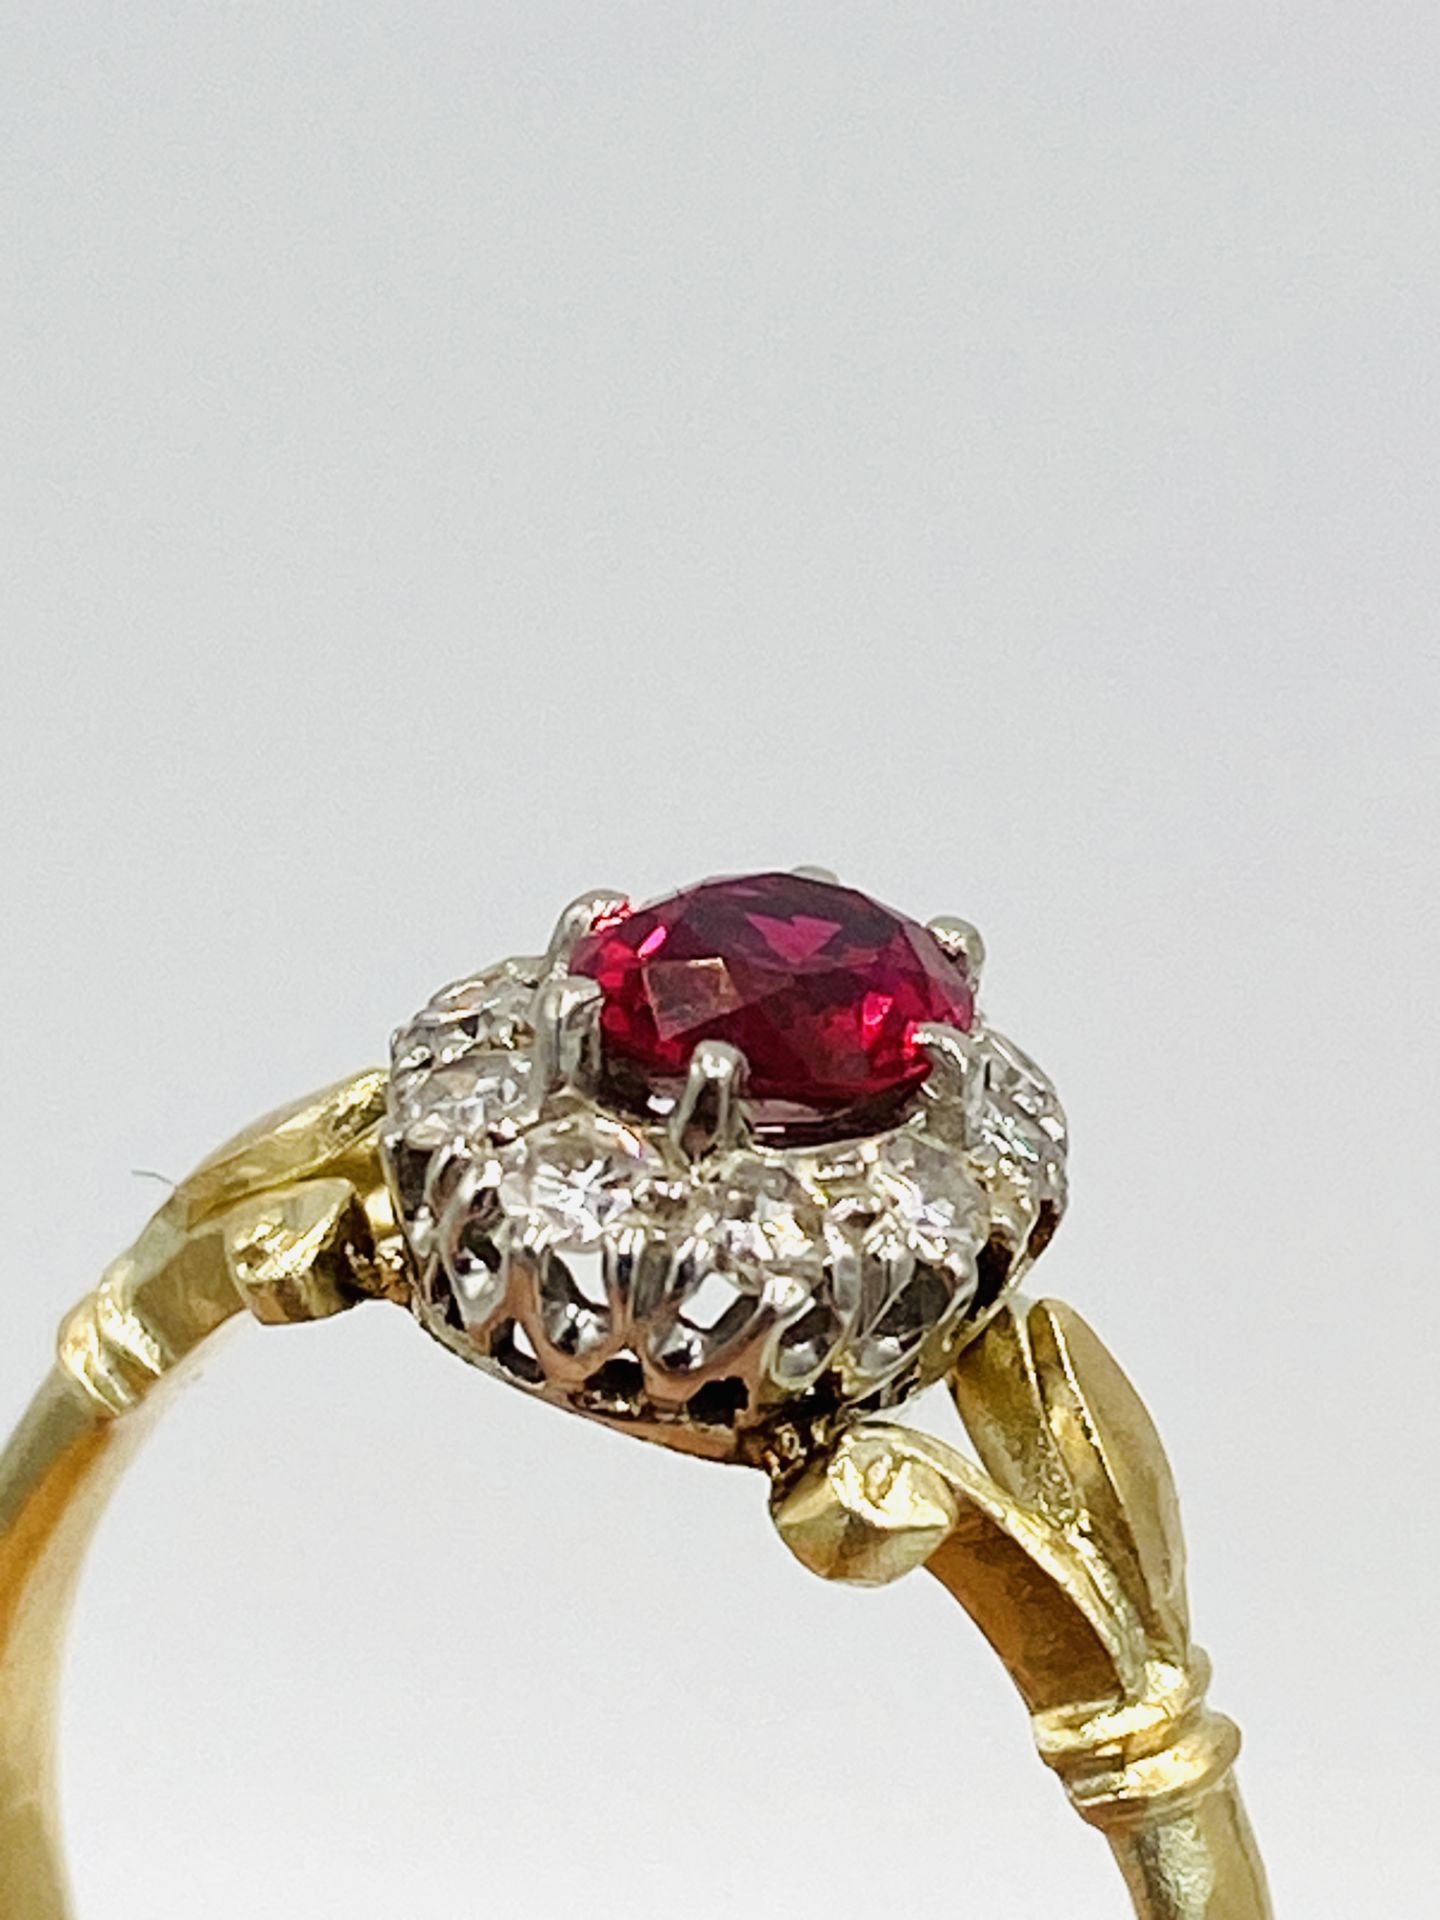 Gold ring set with central ruby and diamond surround - Image 2 of 6